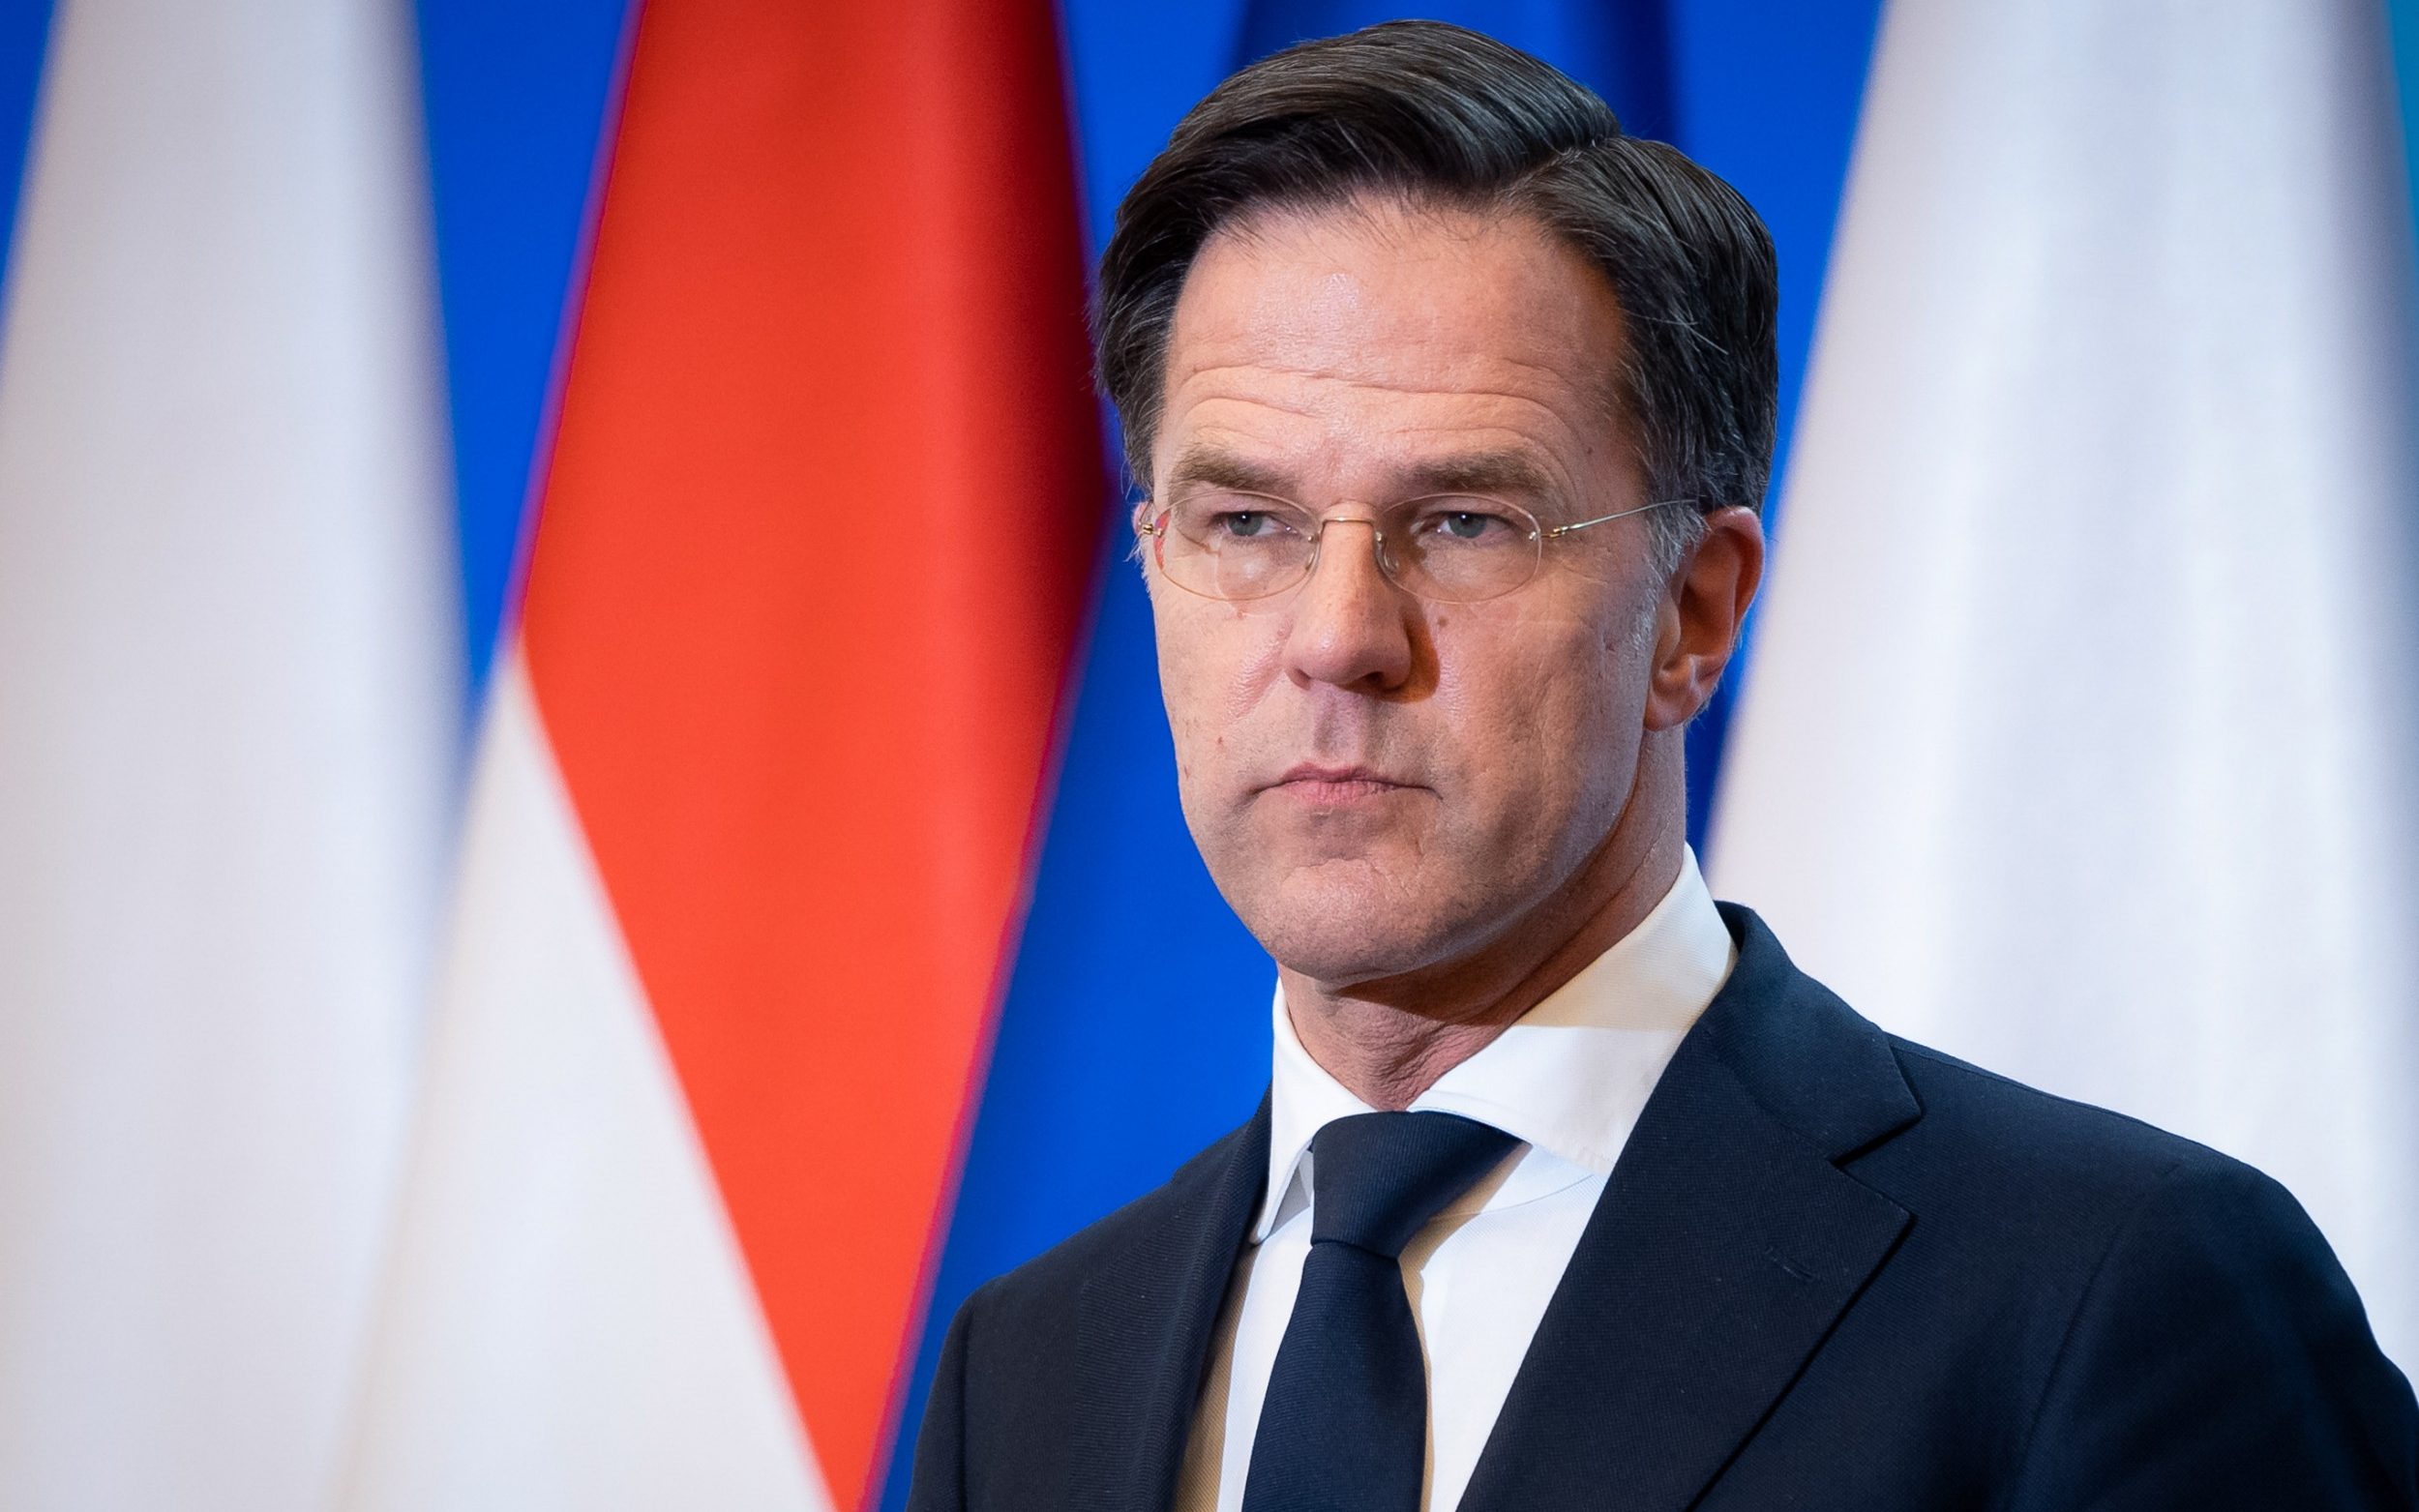 europe must stop ‘whining about trump’, says dutch pm